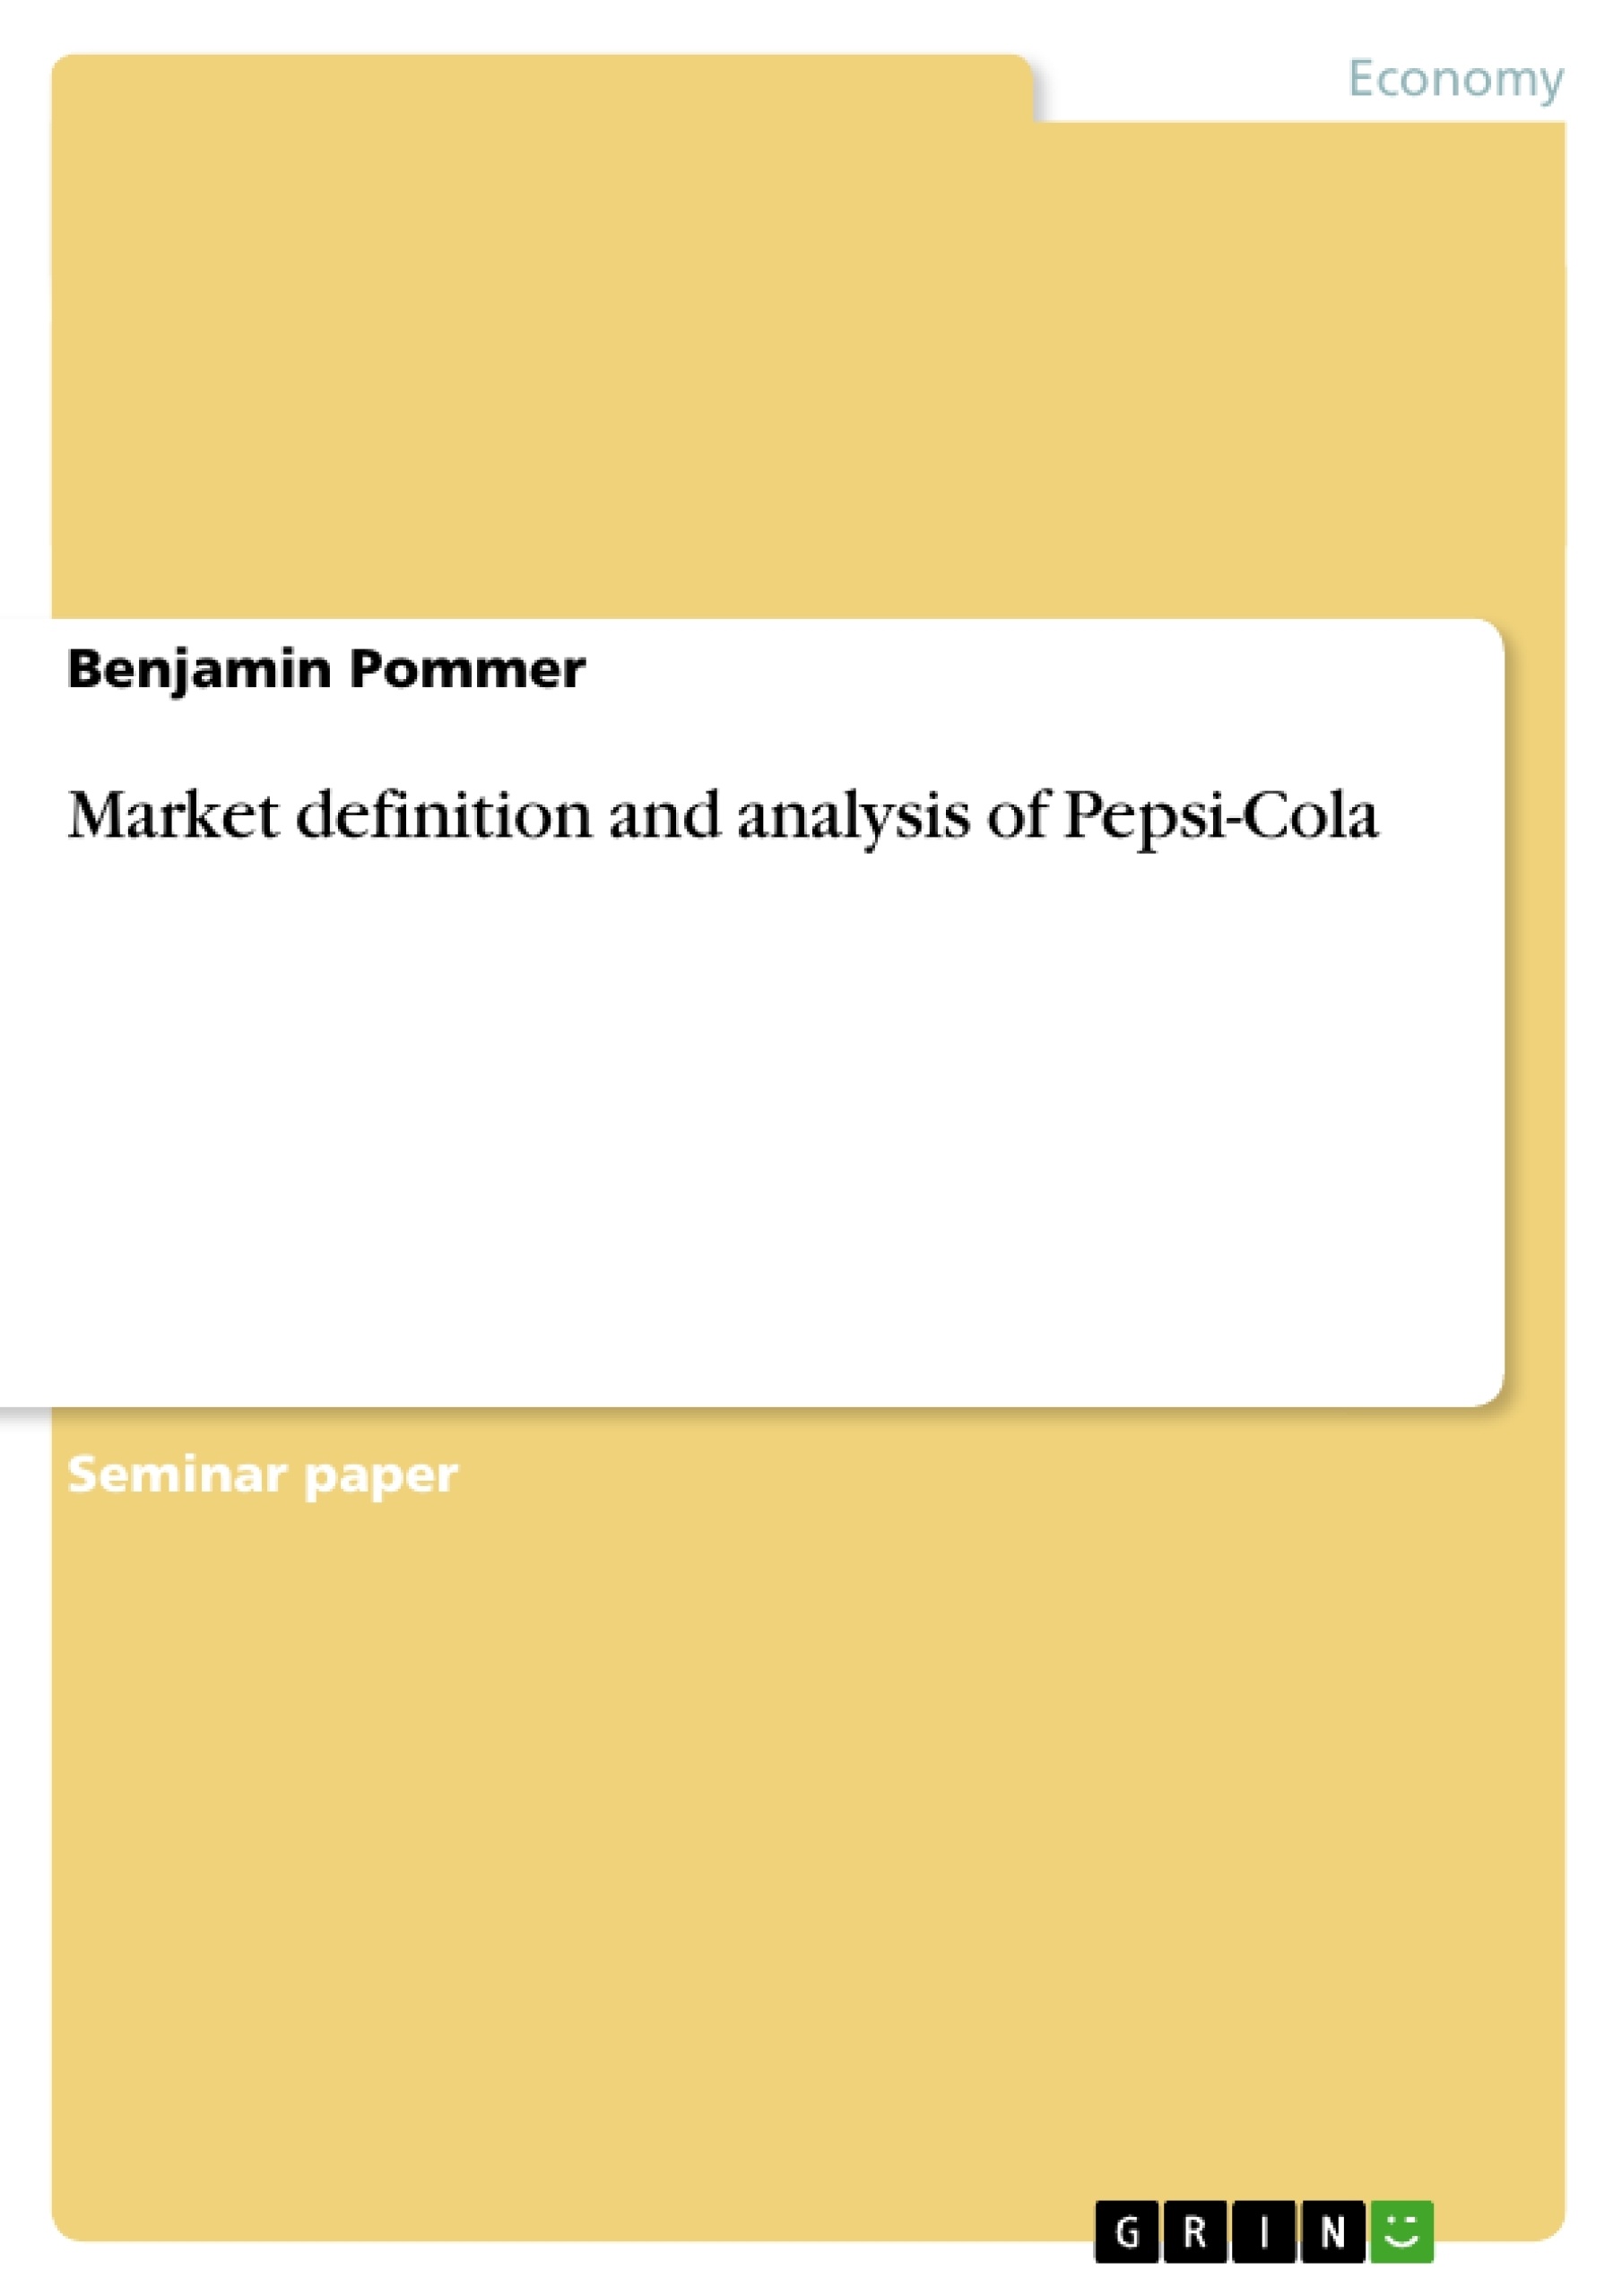 Title: Market definition and analysis of Pepsi-Cola